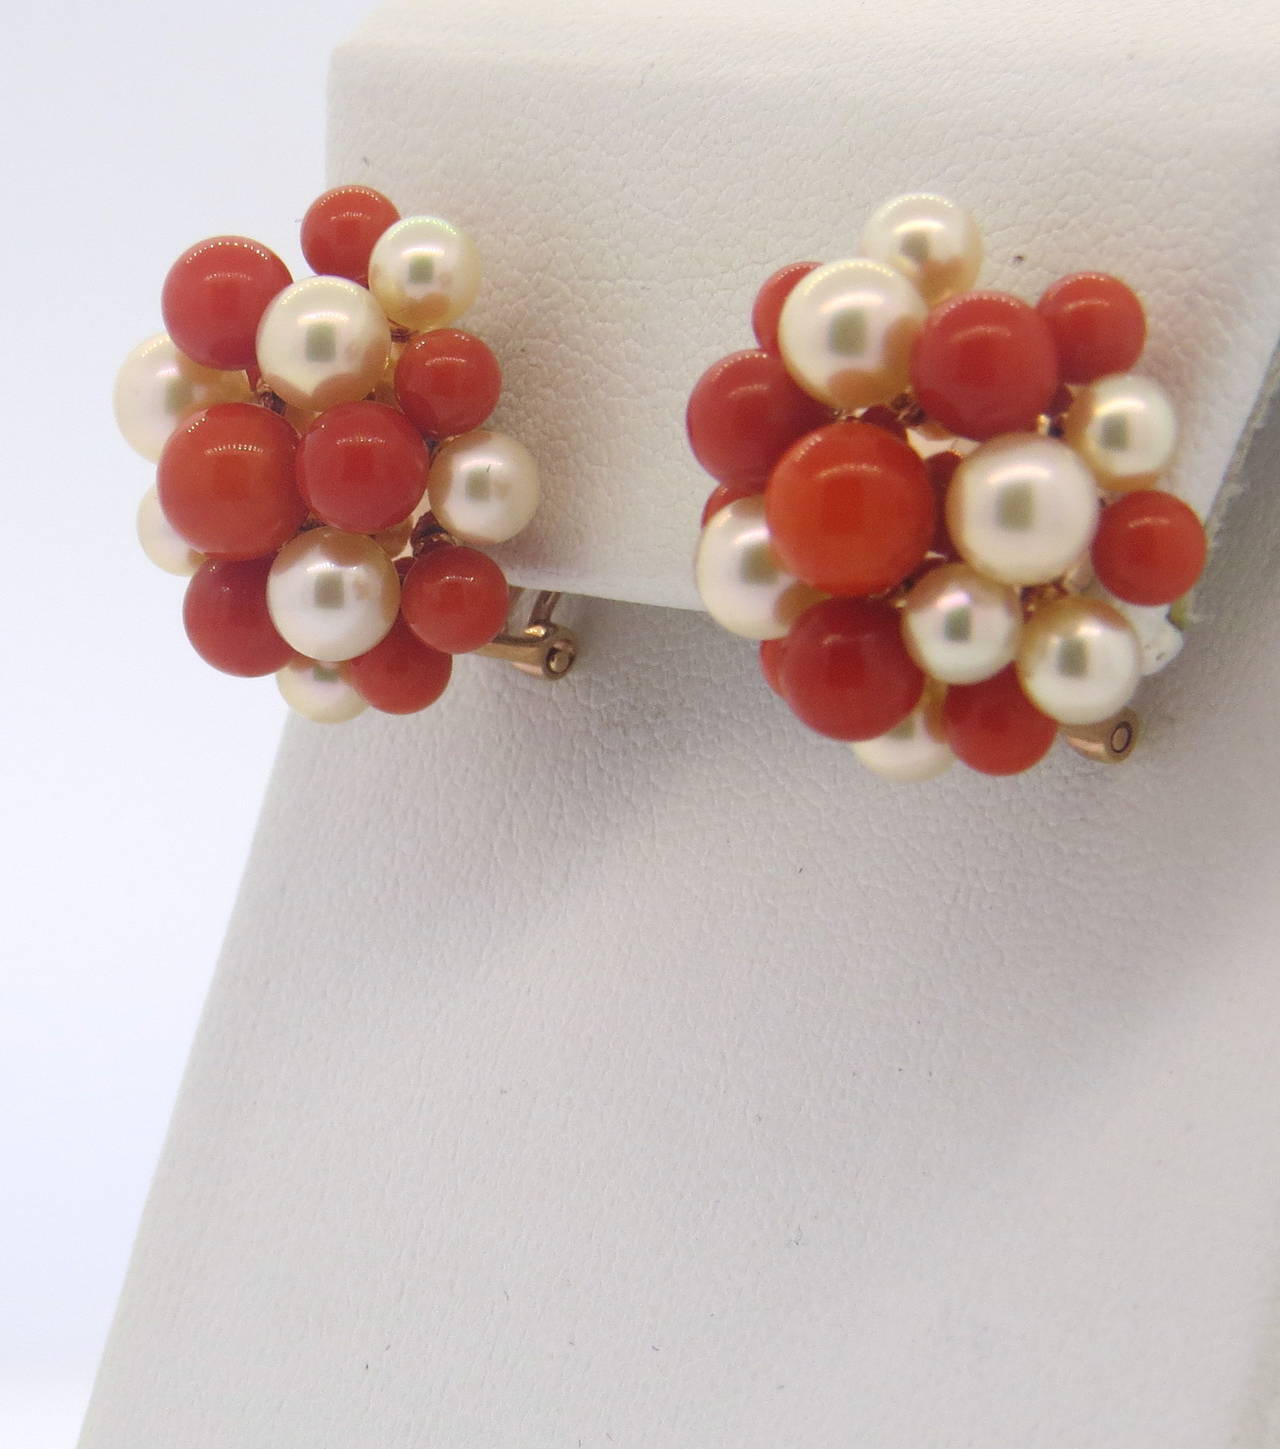 18k rose gold earrings, set with red corals and pearls. Earrings are 22mm x 18mm. Weight - 14.6 grams